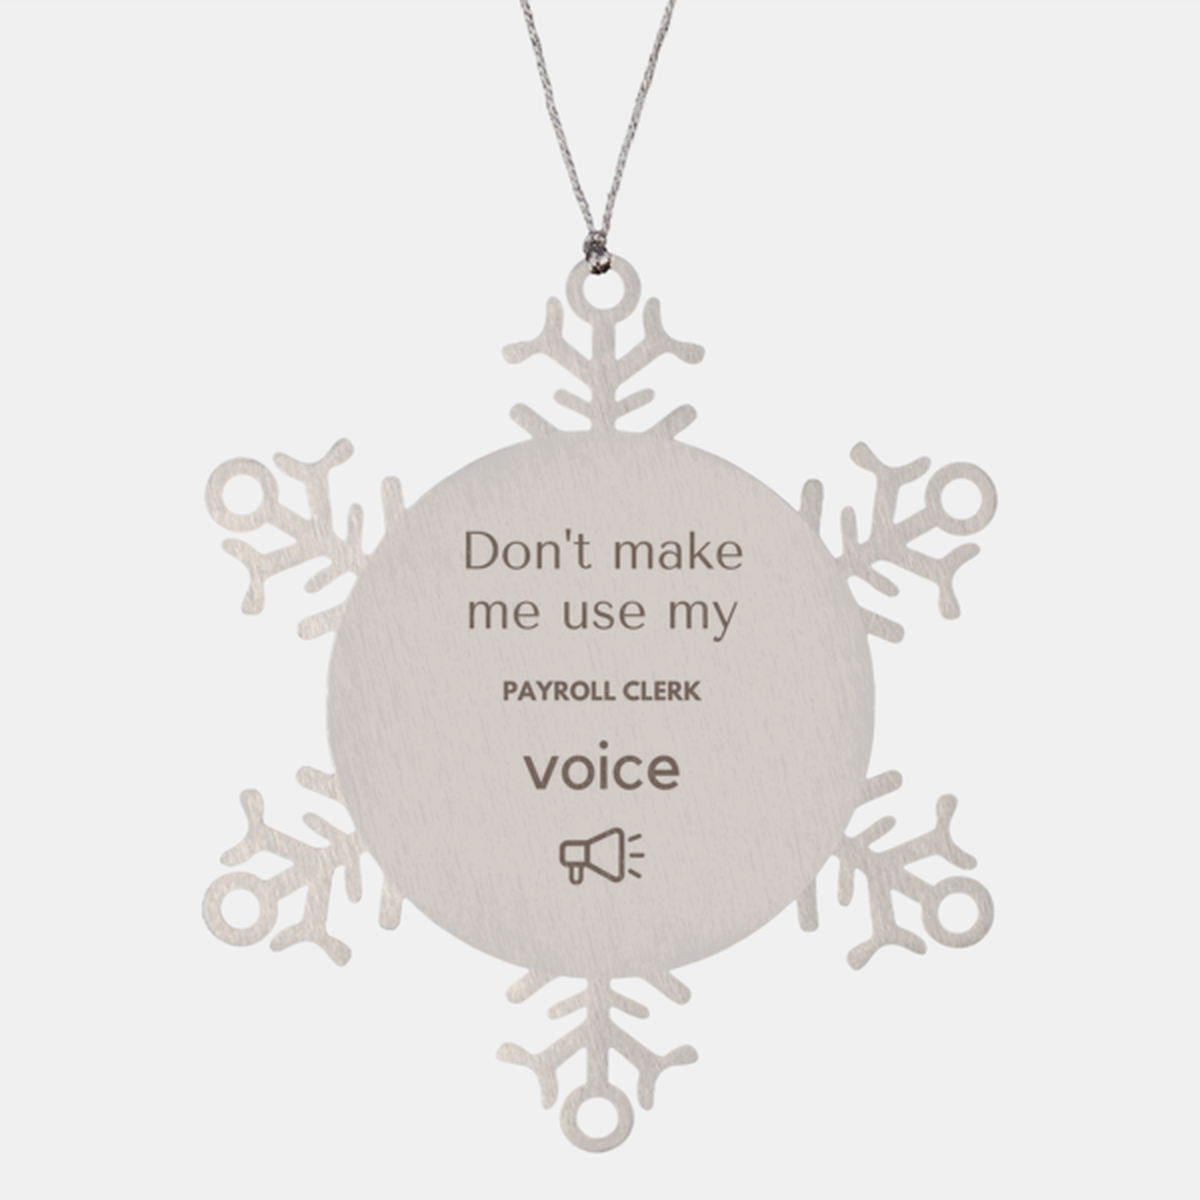 Don't make me use my Payroll Clerk voice, Sarcasm Payroll Clerk Ornament Gifts, Christmas Payroll Clerk Snowflake Ornament Unique Gifts For Payroll Clerk Coworkers, Men, Women, Colleague, Friends